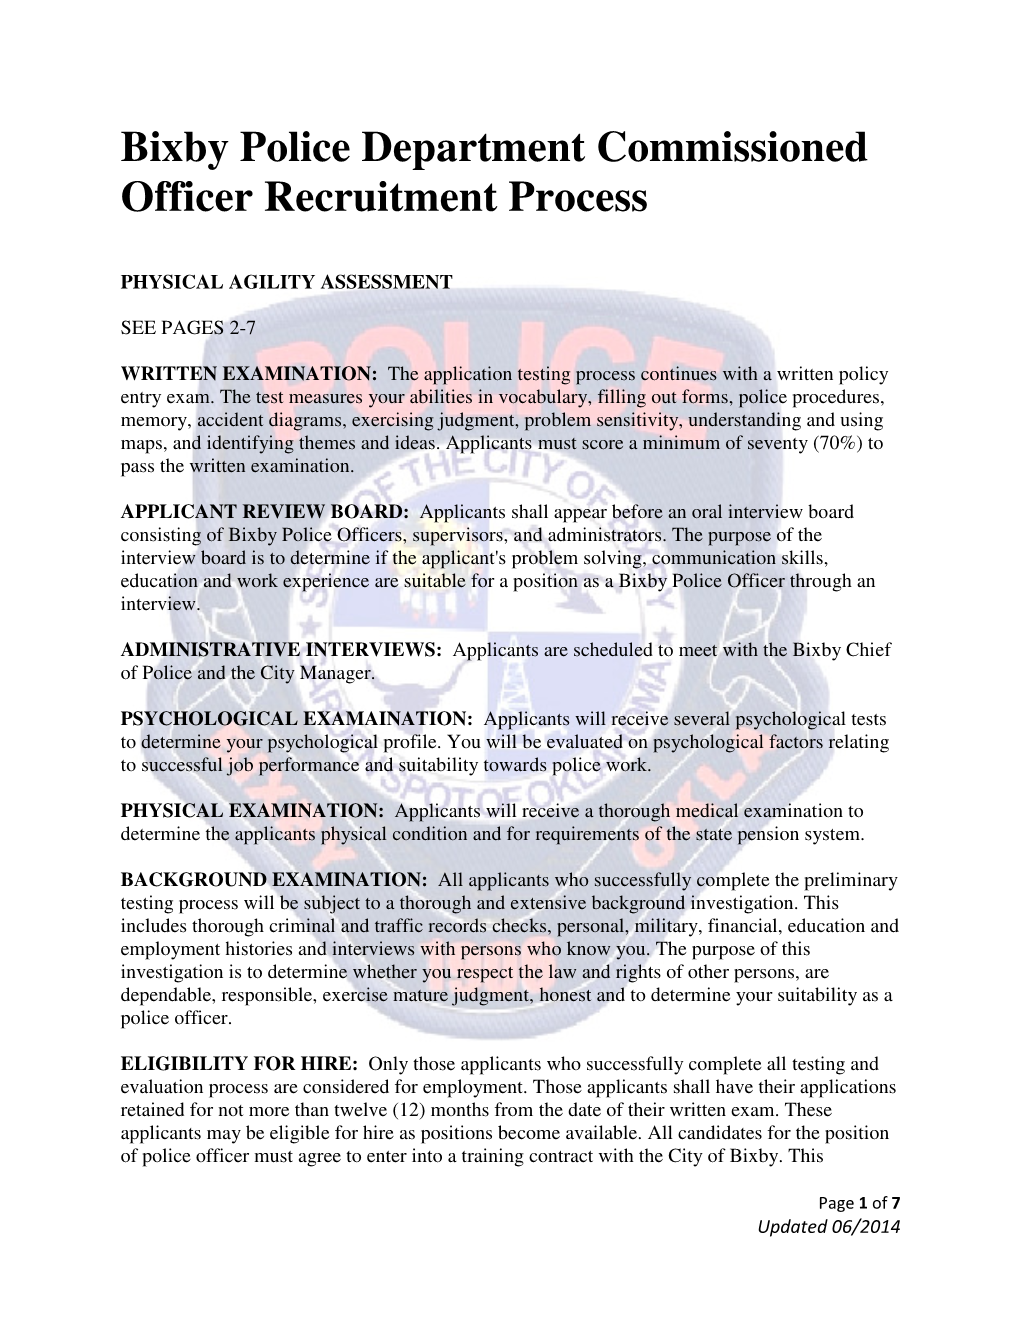 Commissioned Officer Testing Process Recruitment